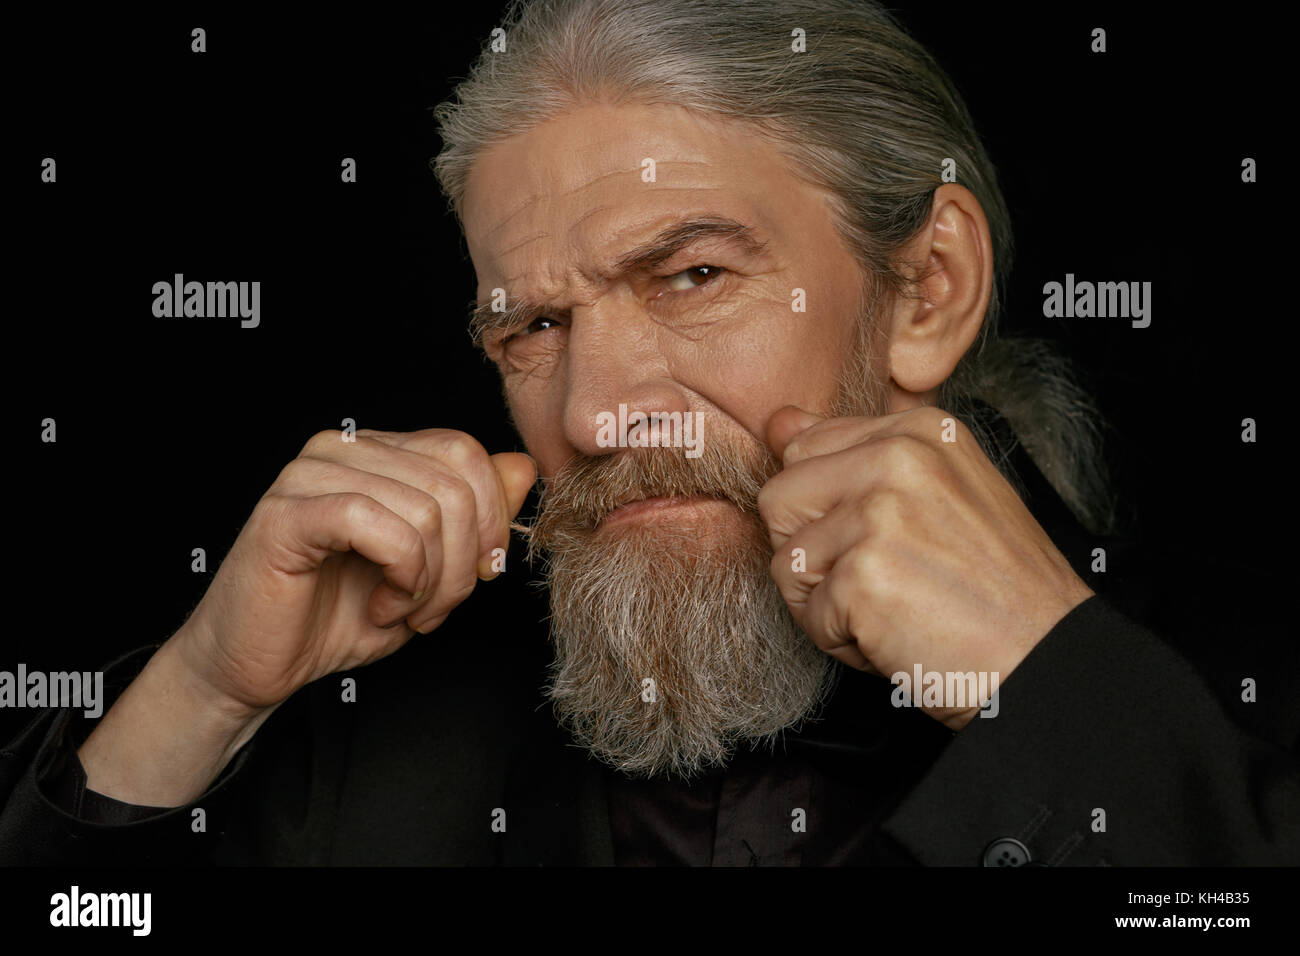 Close up portrait of aged grey haired man. Stock Photo